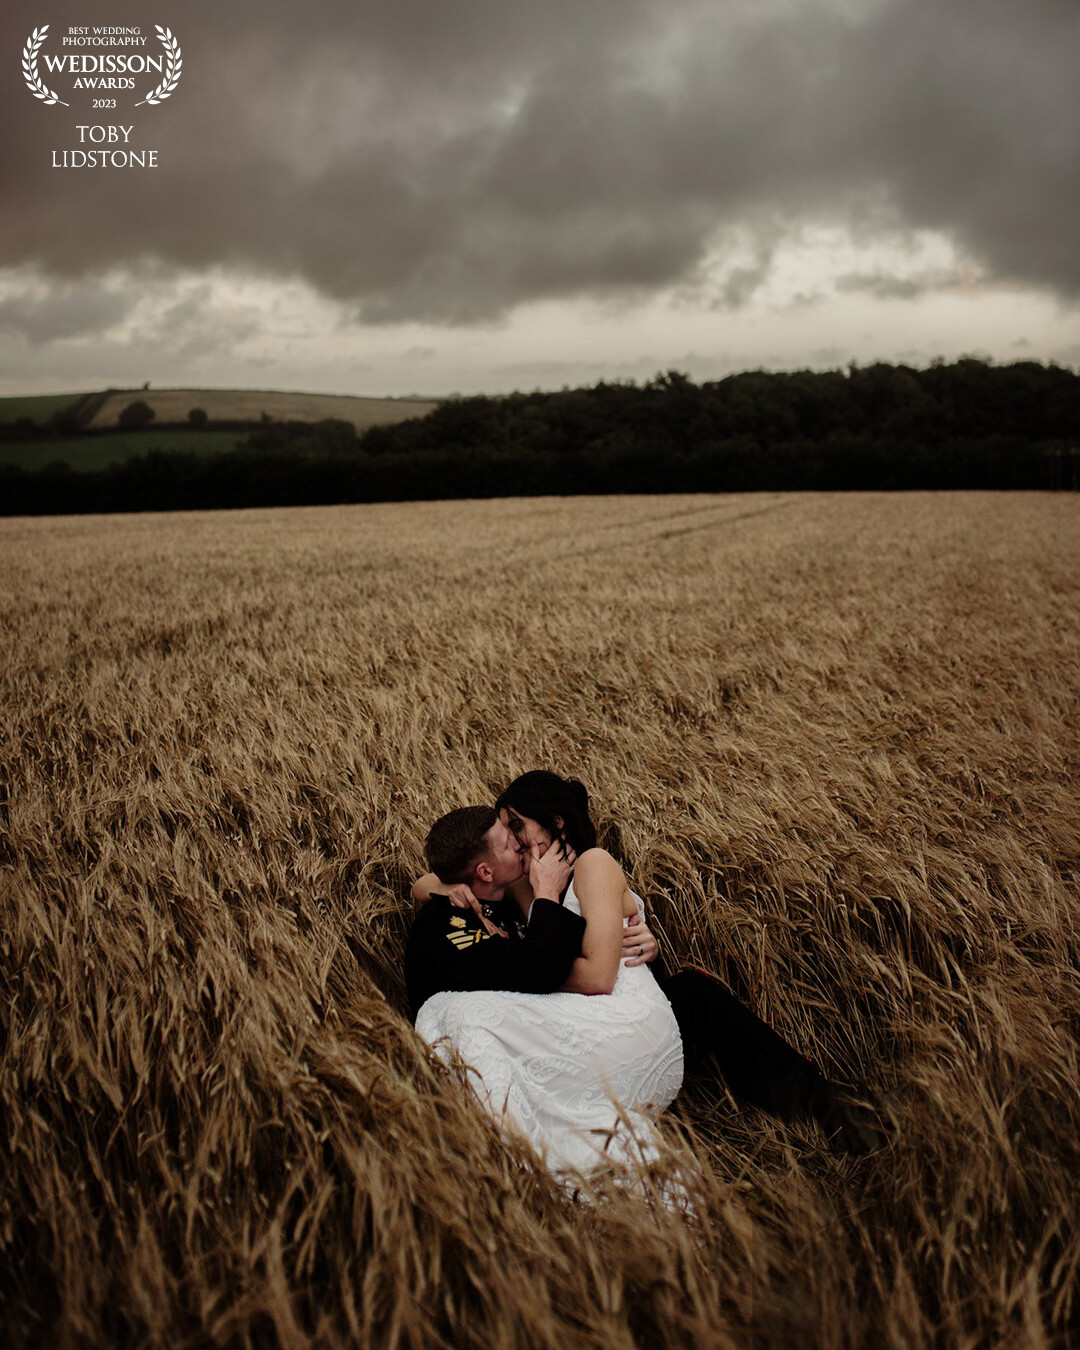 I love this shot of Ryan & Amy having a kiss in her family's corn field.